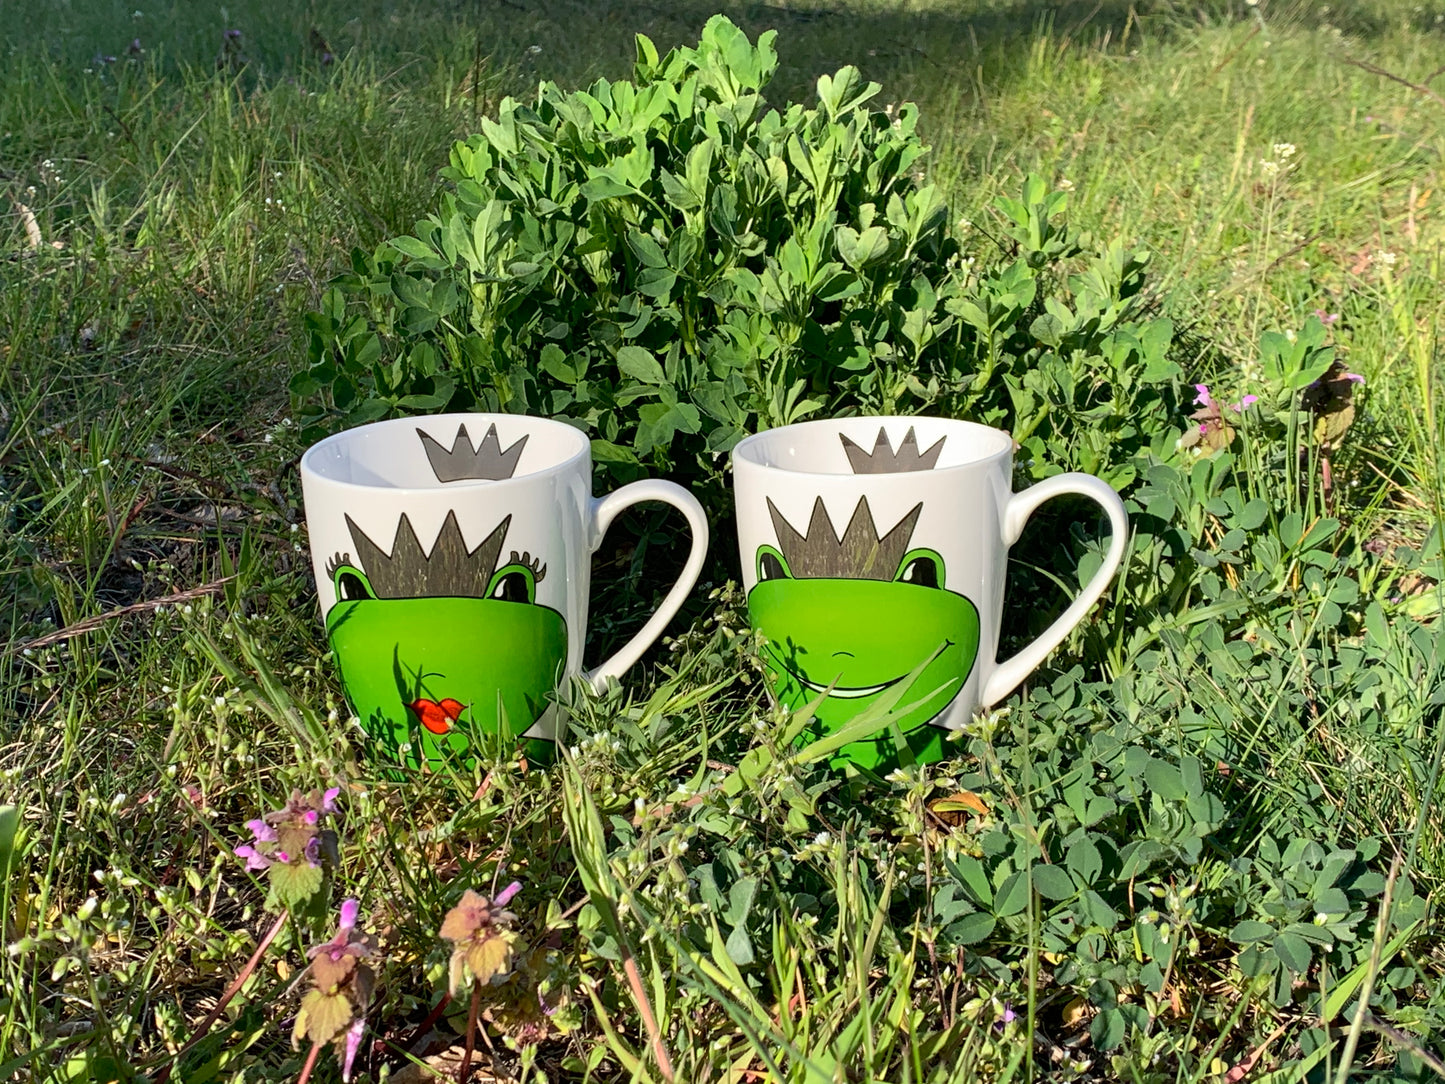 Frog queen Kate, mug in a gift box